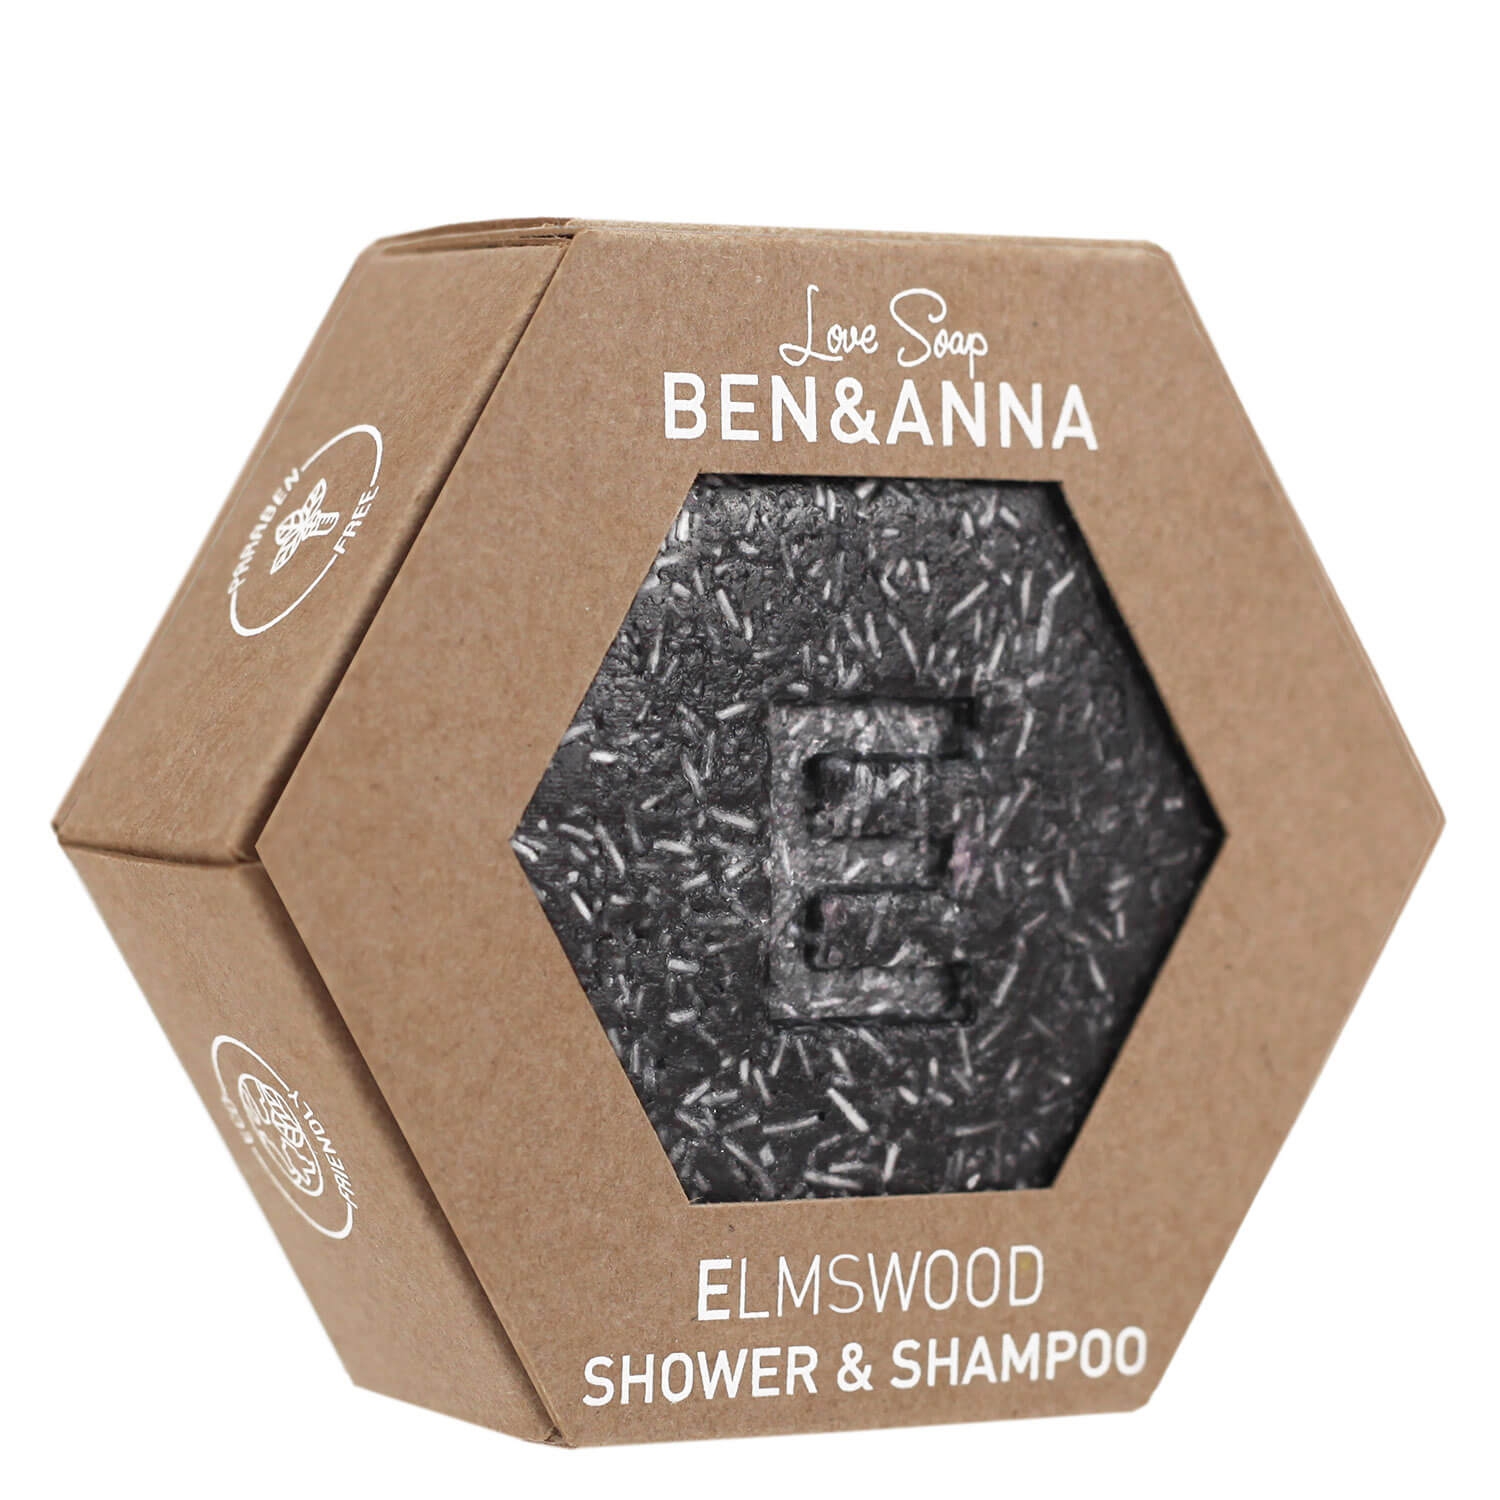 Product image from BEN&ANNA - Elmswood Shower & Shampoo